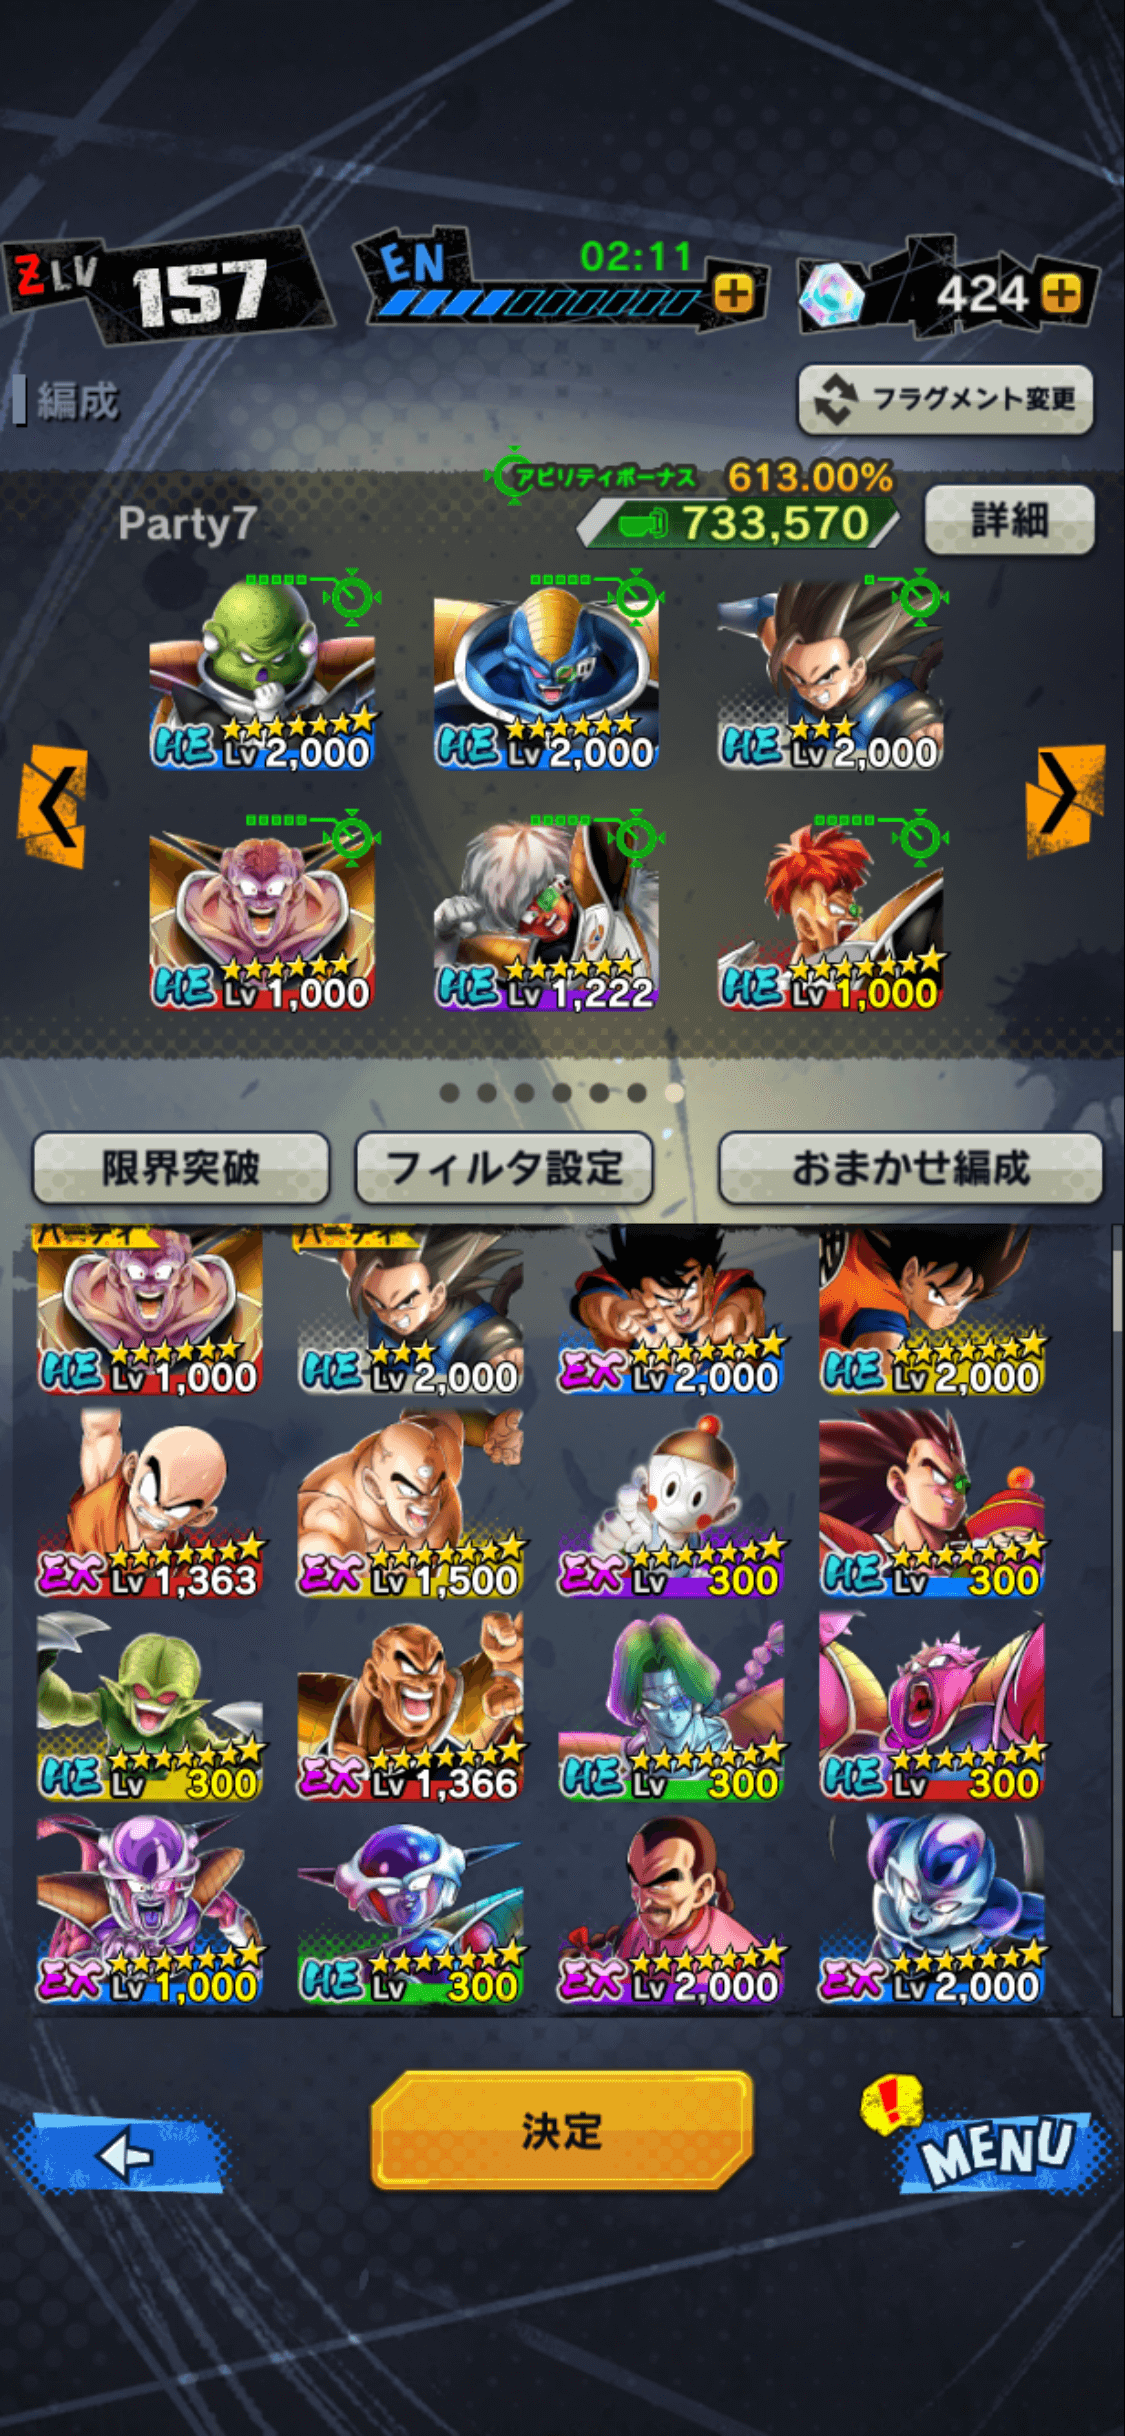 HERO Tag List, Characters, Dragon Ball Legends